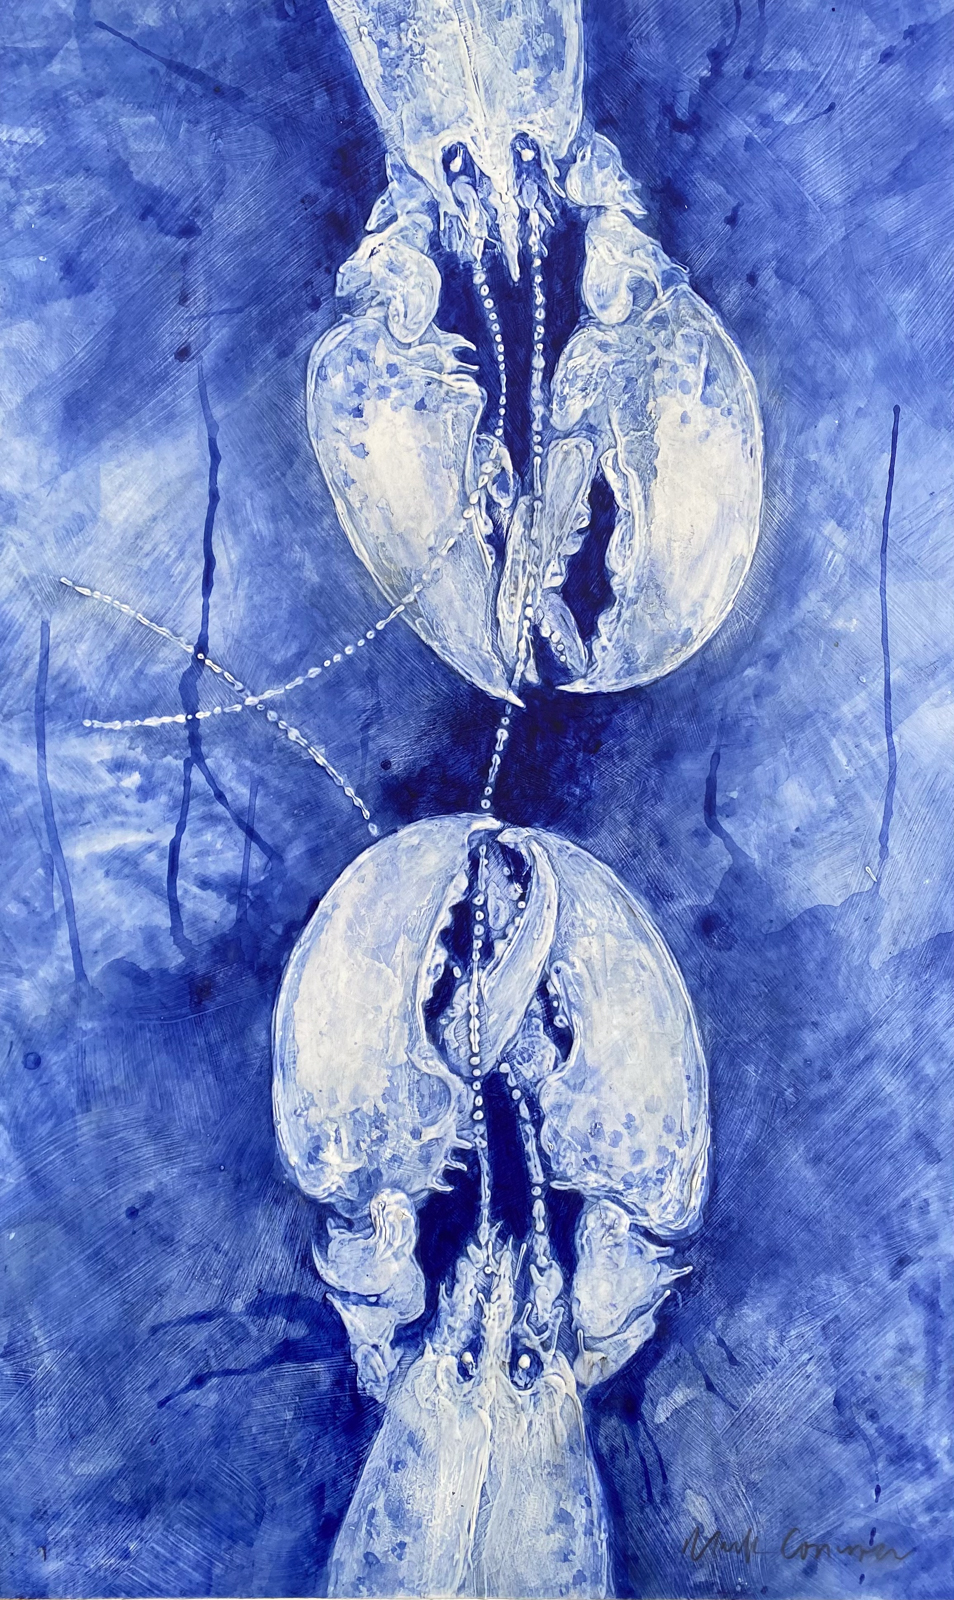 Severing Ties — This blue acrylic monochrome over a textured gesso base makes a statement about the ending of a relationship. Two lobsters are both severing their mutually connected antennae and each are left with a shortened pair. The most saturated colour is between the claws and also surrounds the head accentuating the negative space of the lobster body shapes.